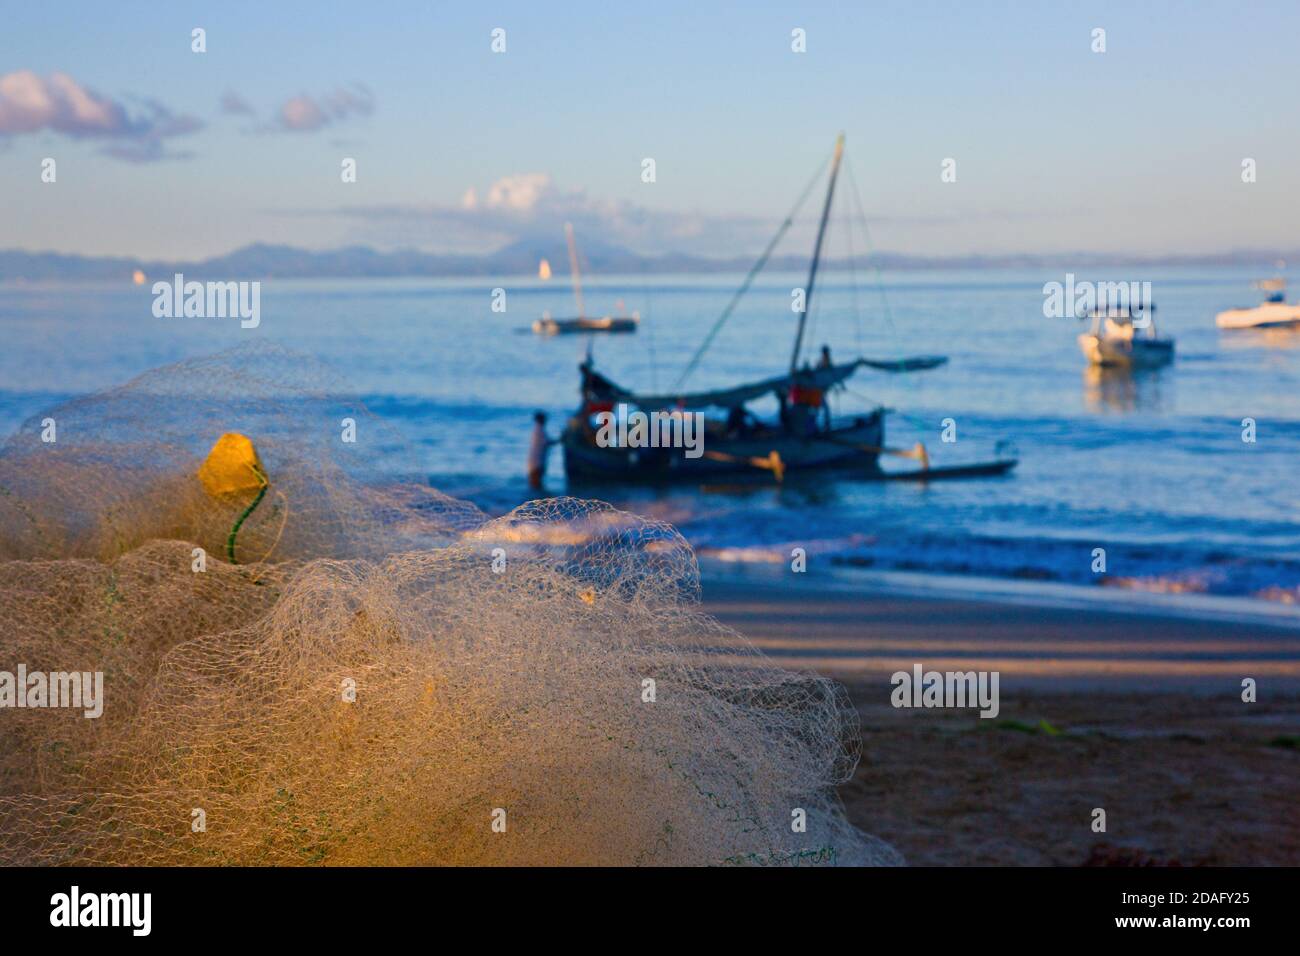 Fishing Nets in a Tin Boat on the Shore Stock Photo - Image of shore,  metal: 249503216